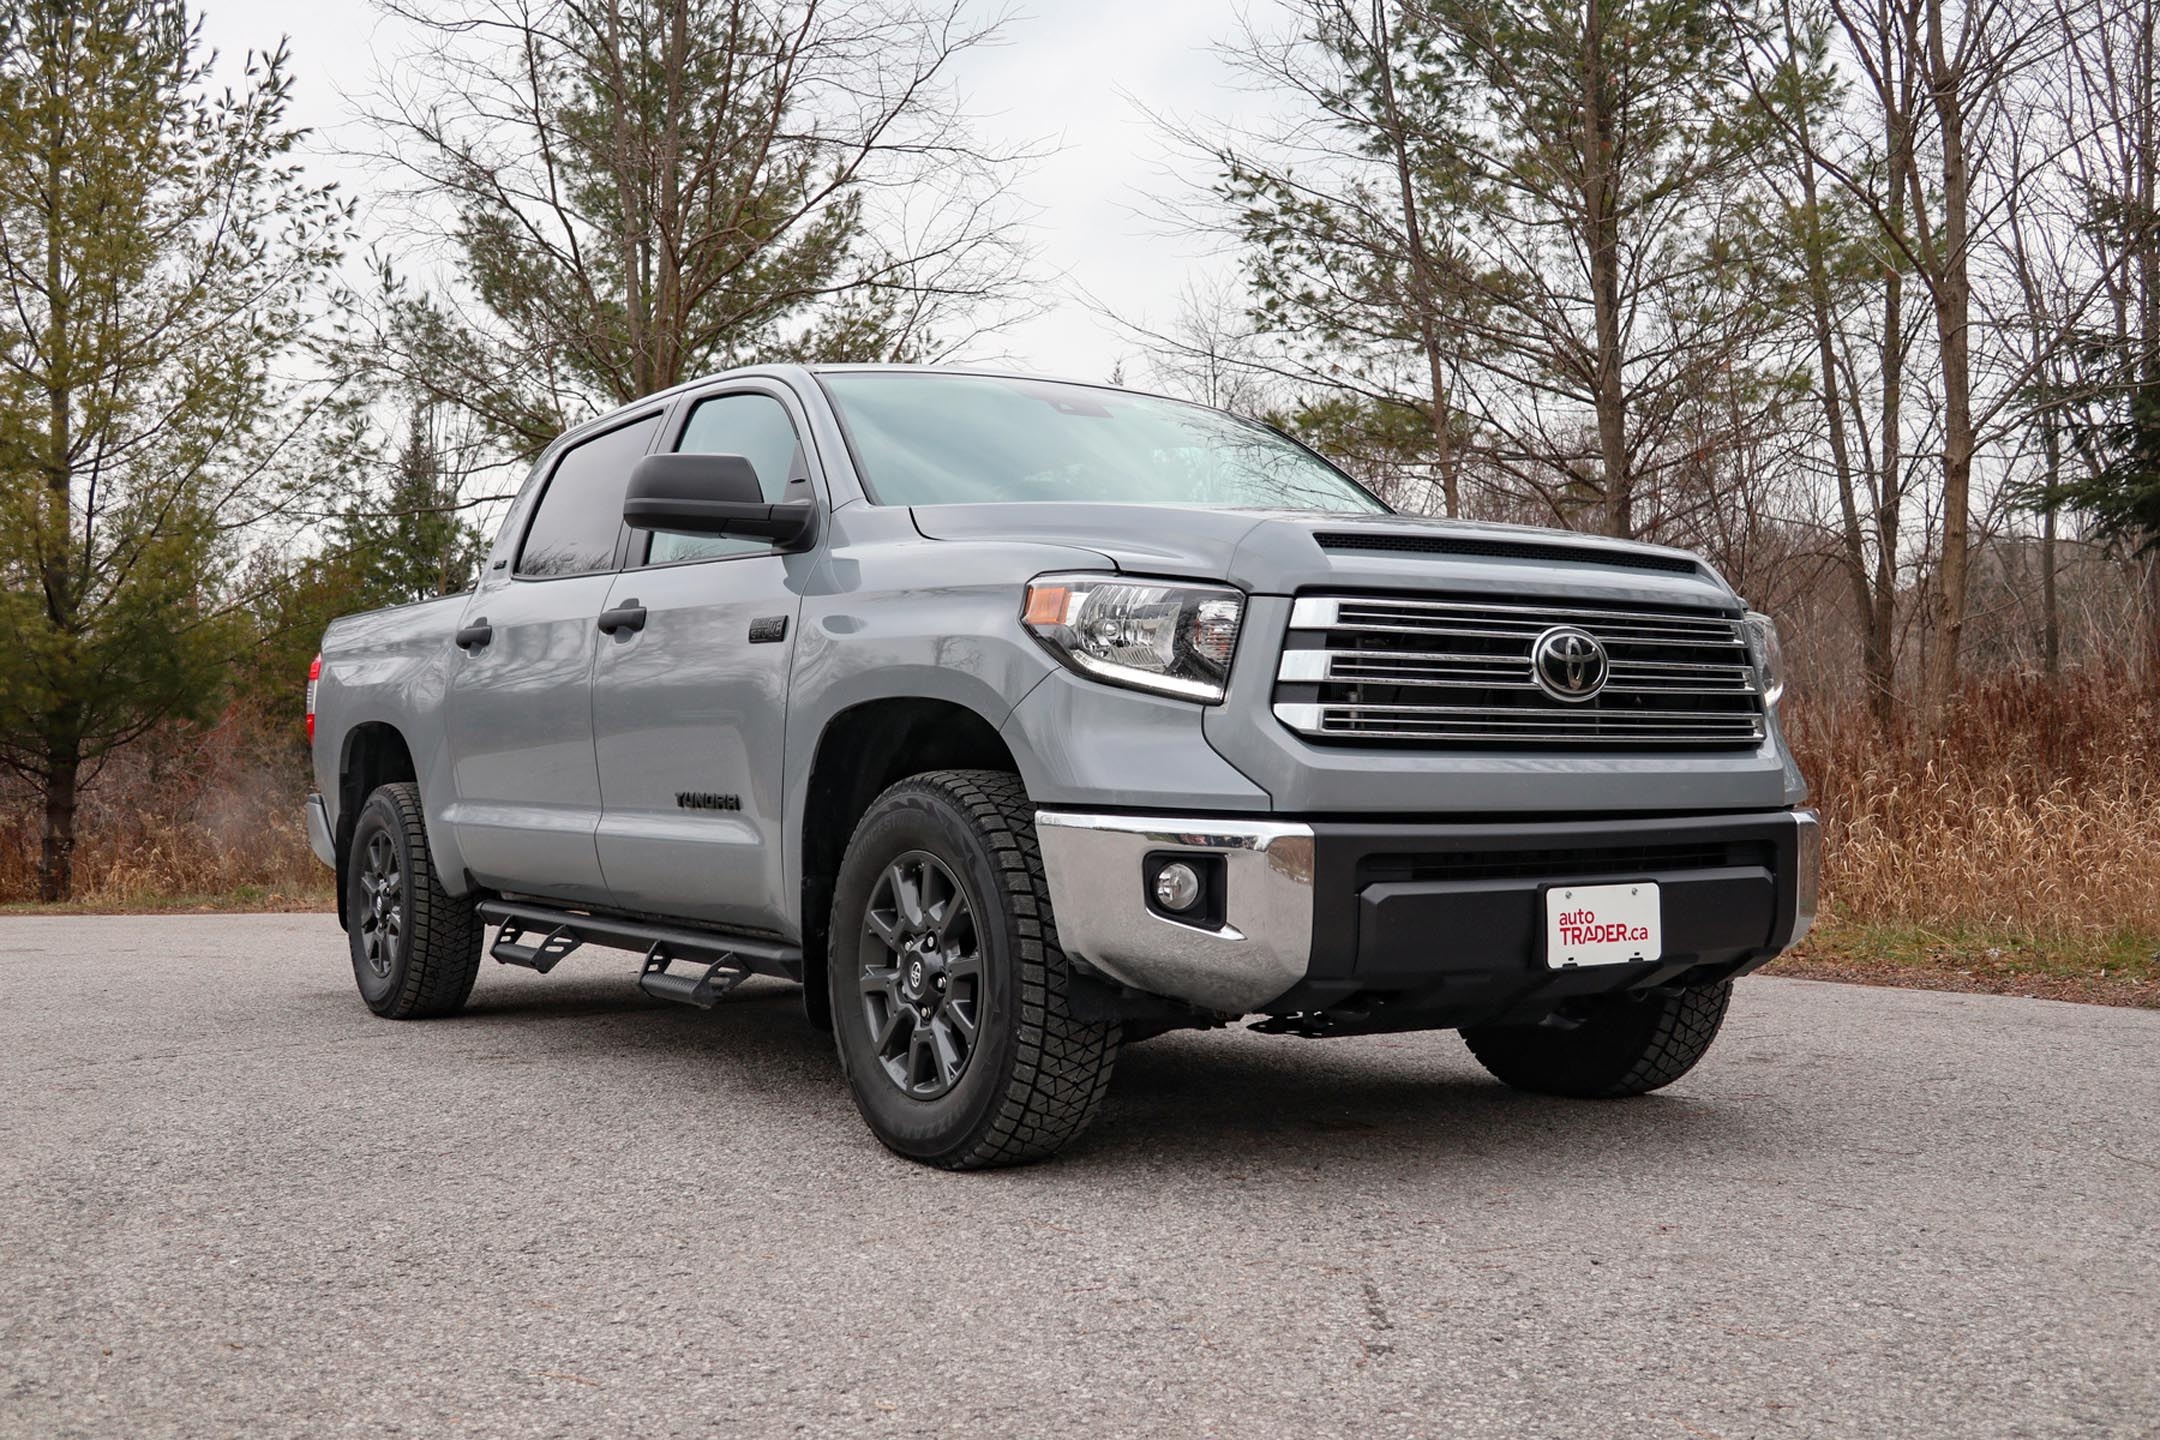 Toyota Tundra, Truck review, Exceptional performance, 2160x1440 HD Desktop